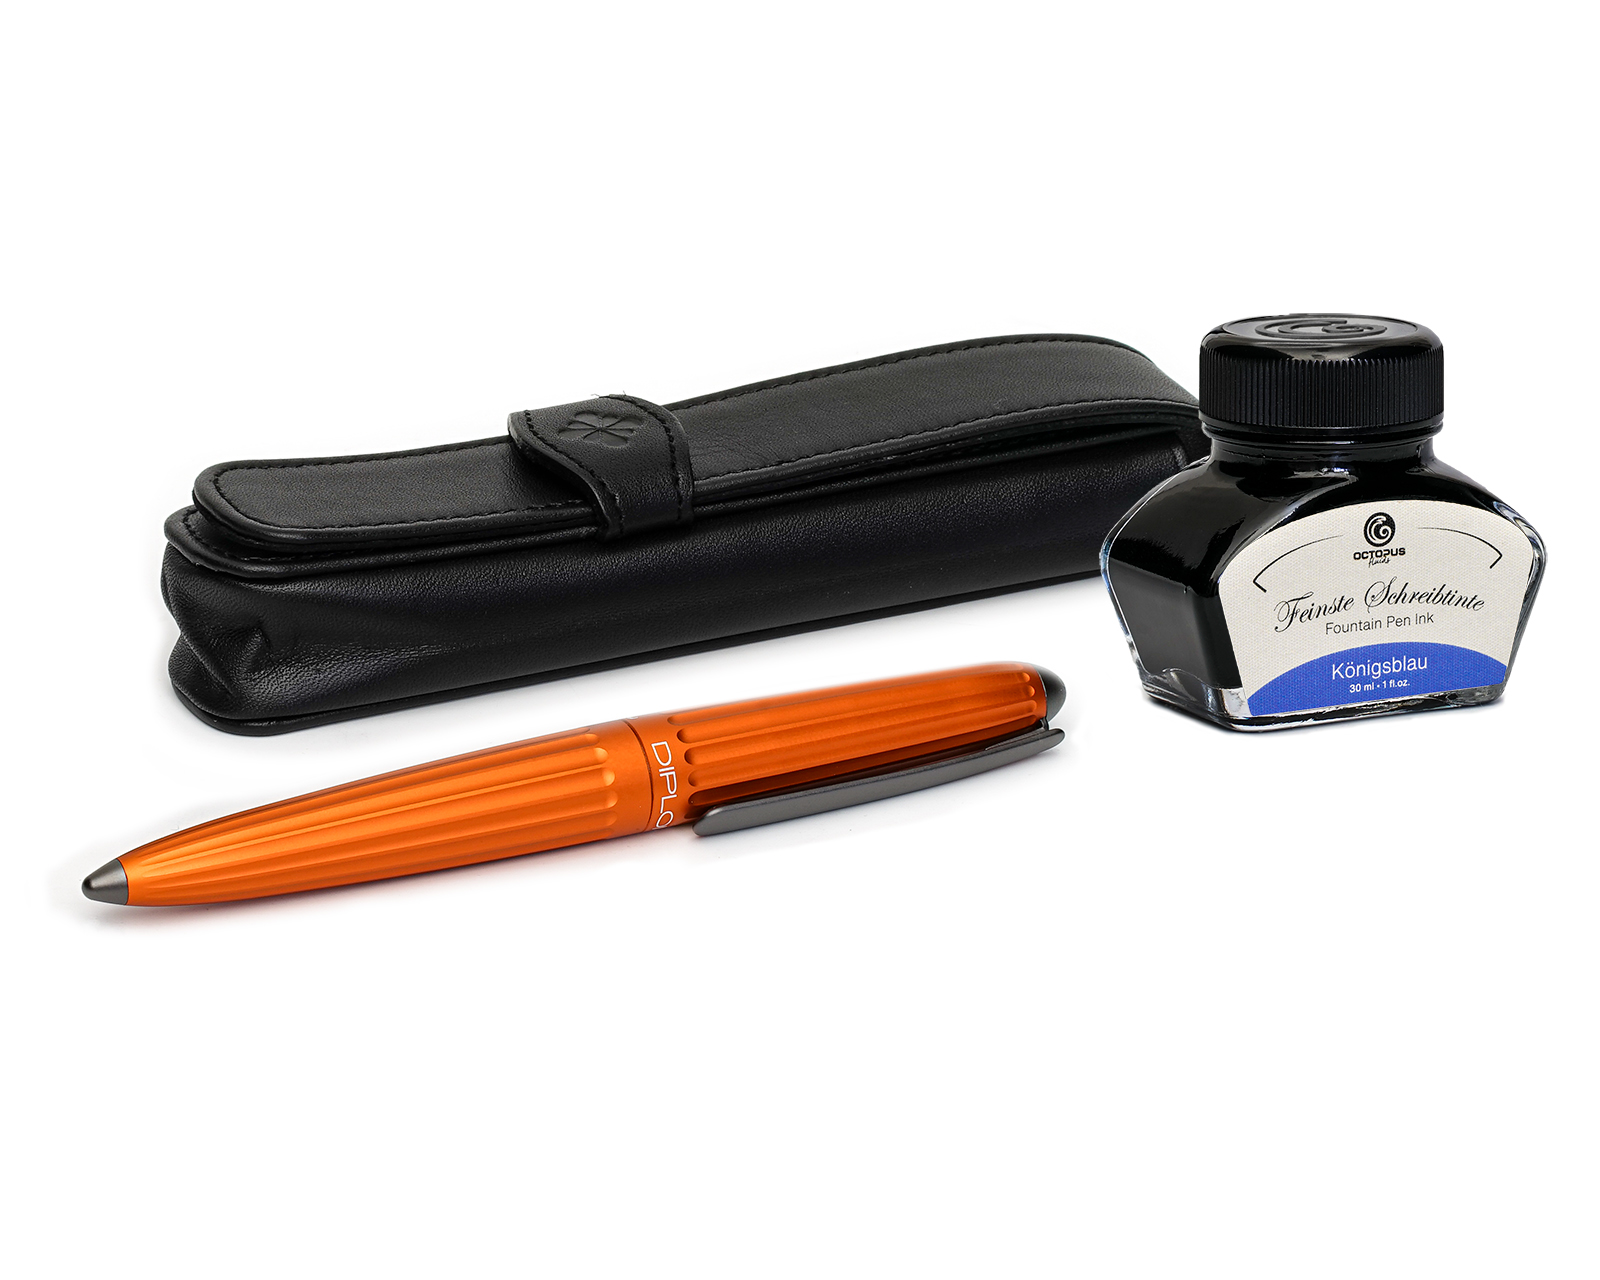 Fountain pen set Diplomat Aero orange, stainless steel nib M, with fountain pen ink in royal blue and pen case made of genuine leather